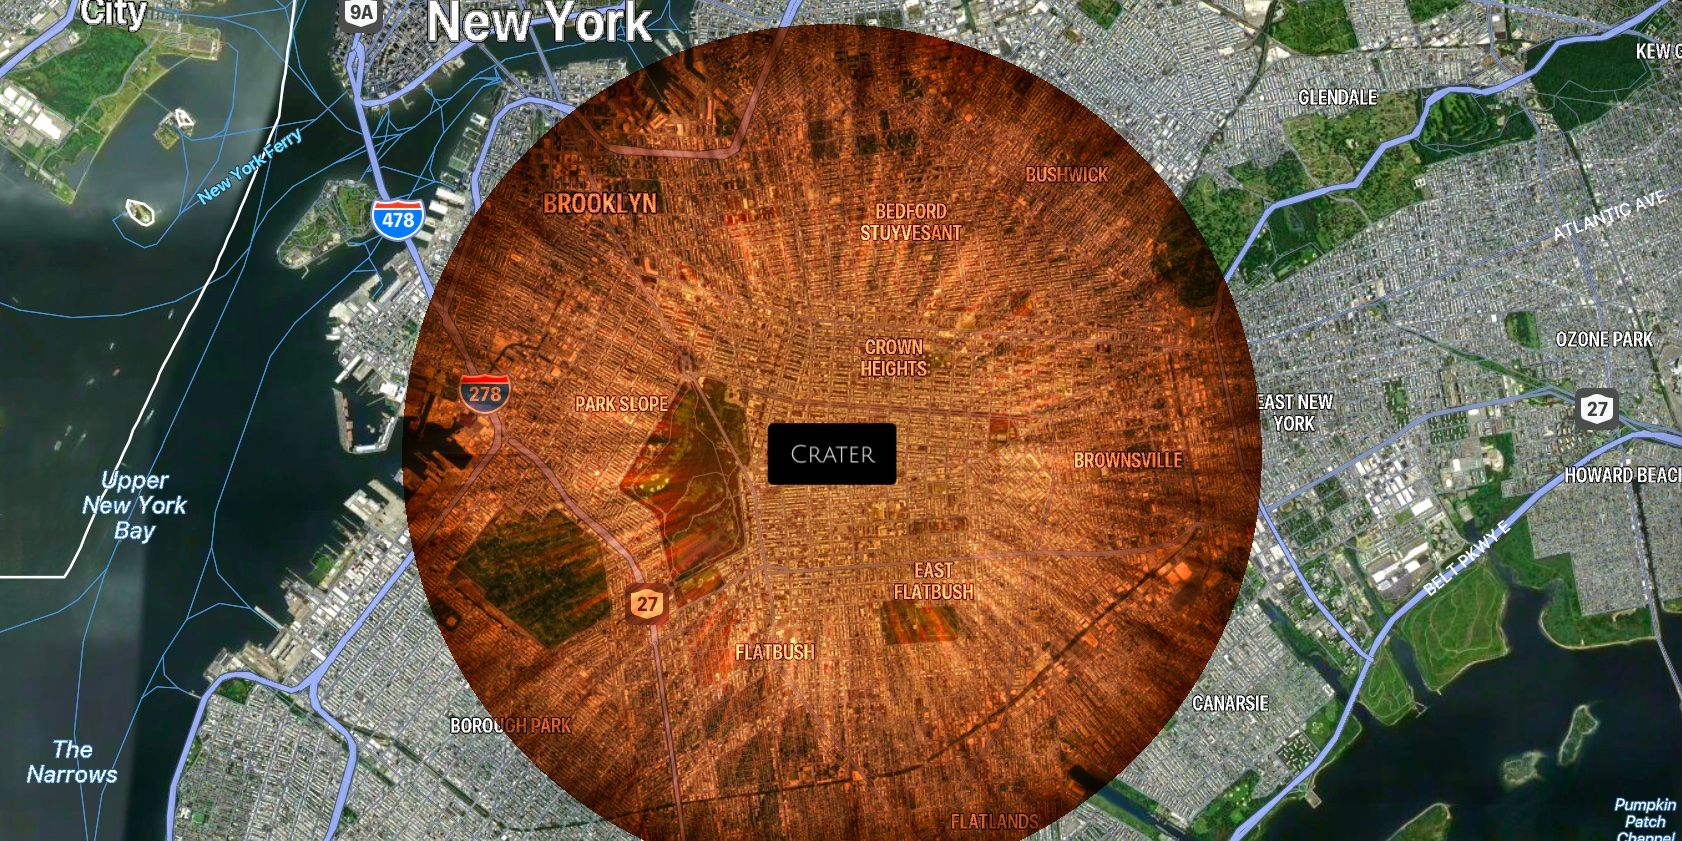 A simulated crater is pictured in brown superimposed over a map of Brooklyn, showing the radius of the crater from a hypothetical asteroid impact